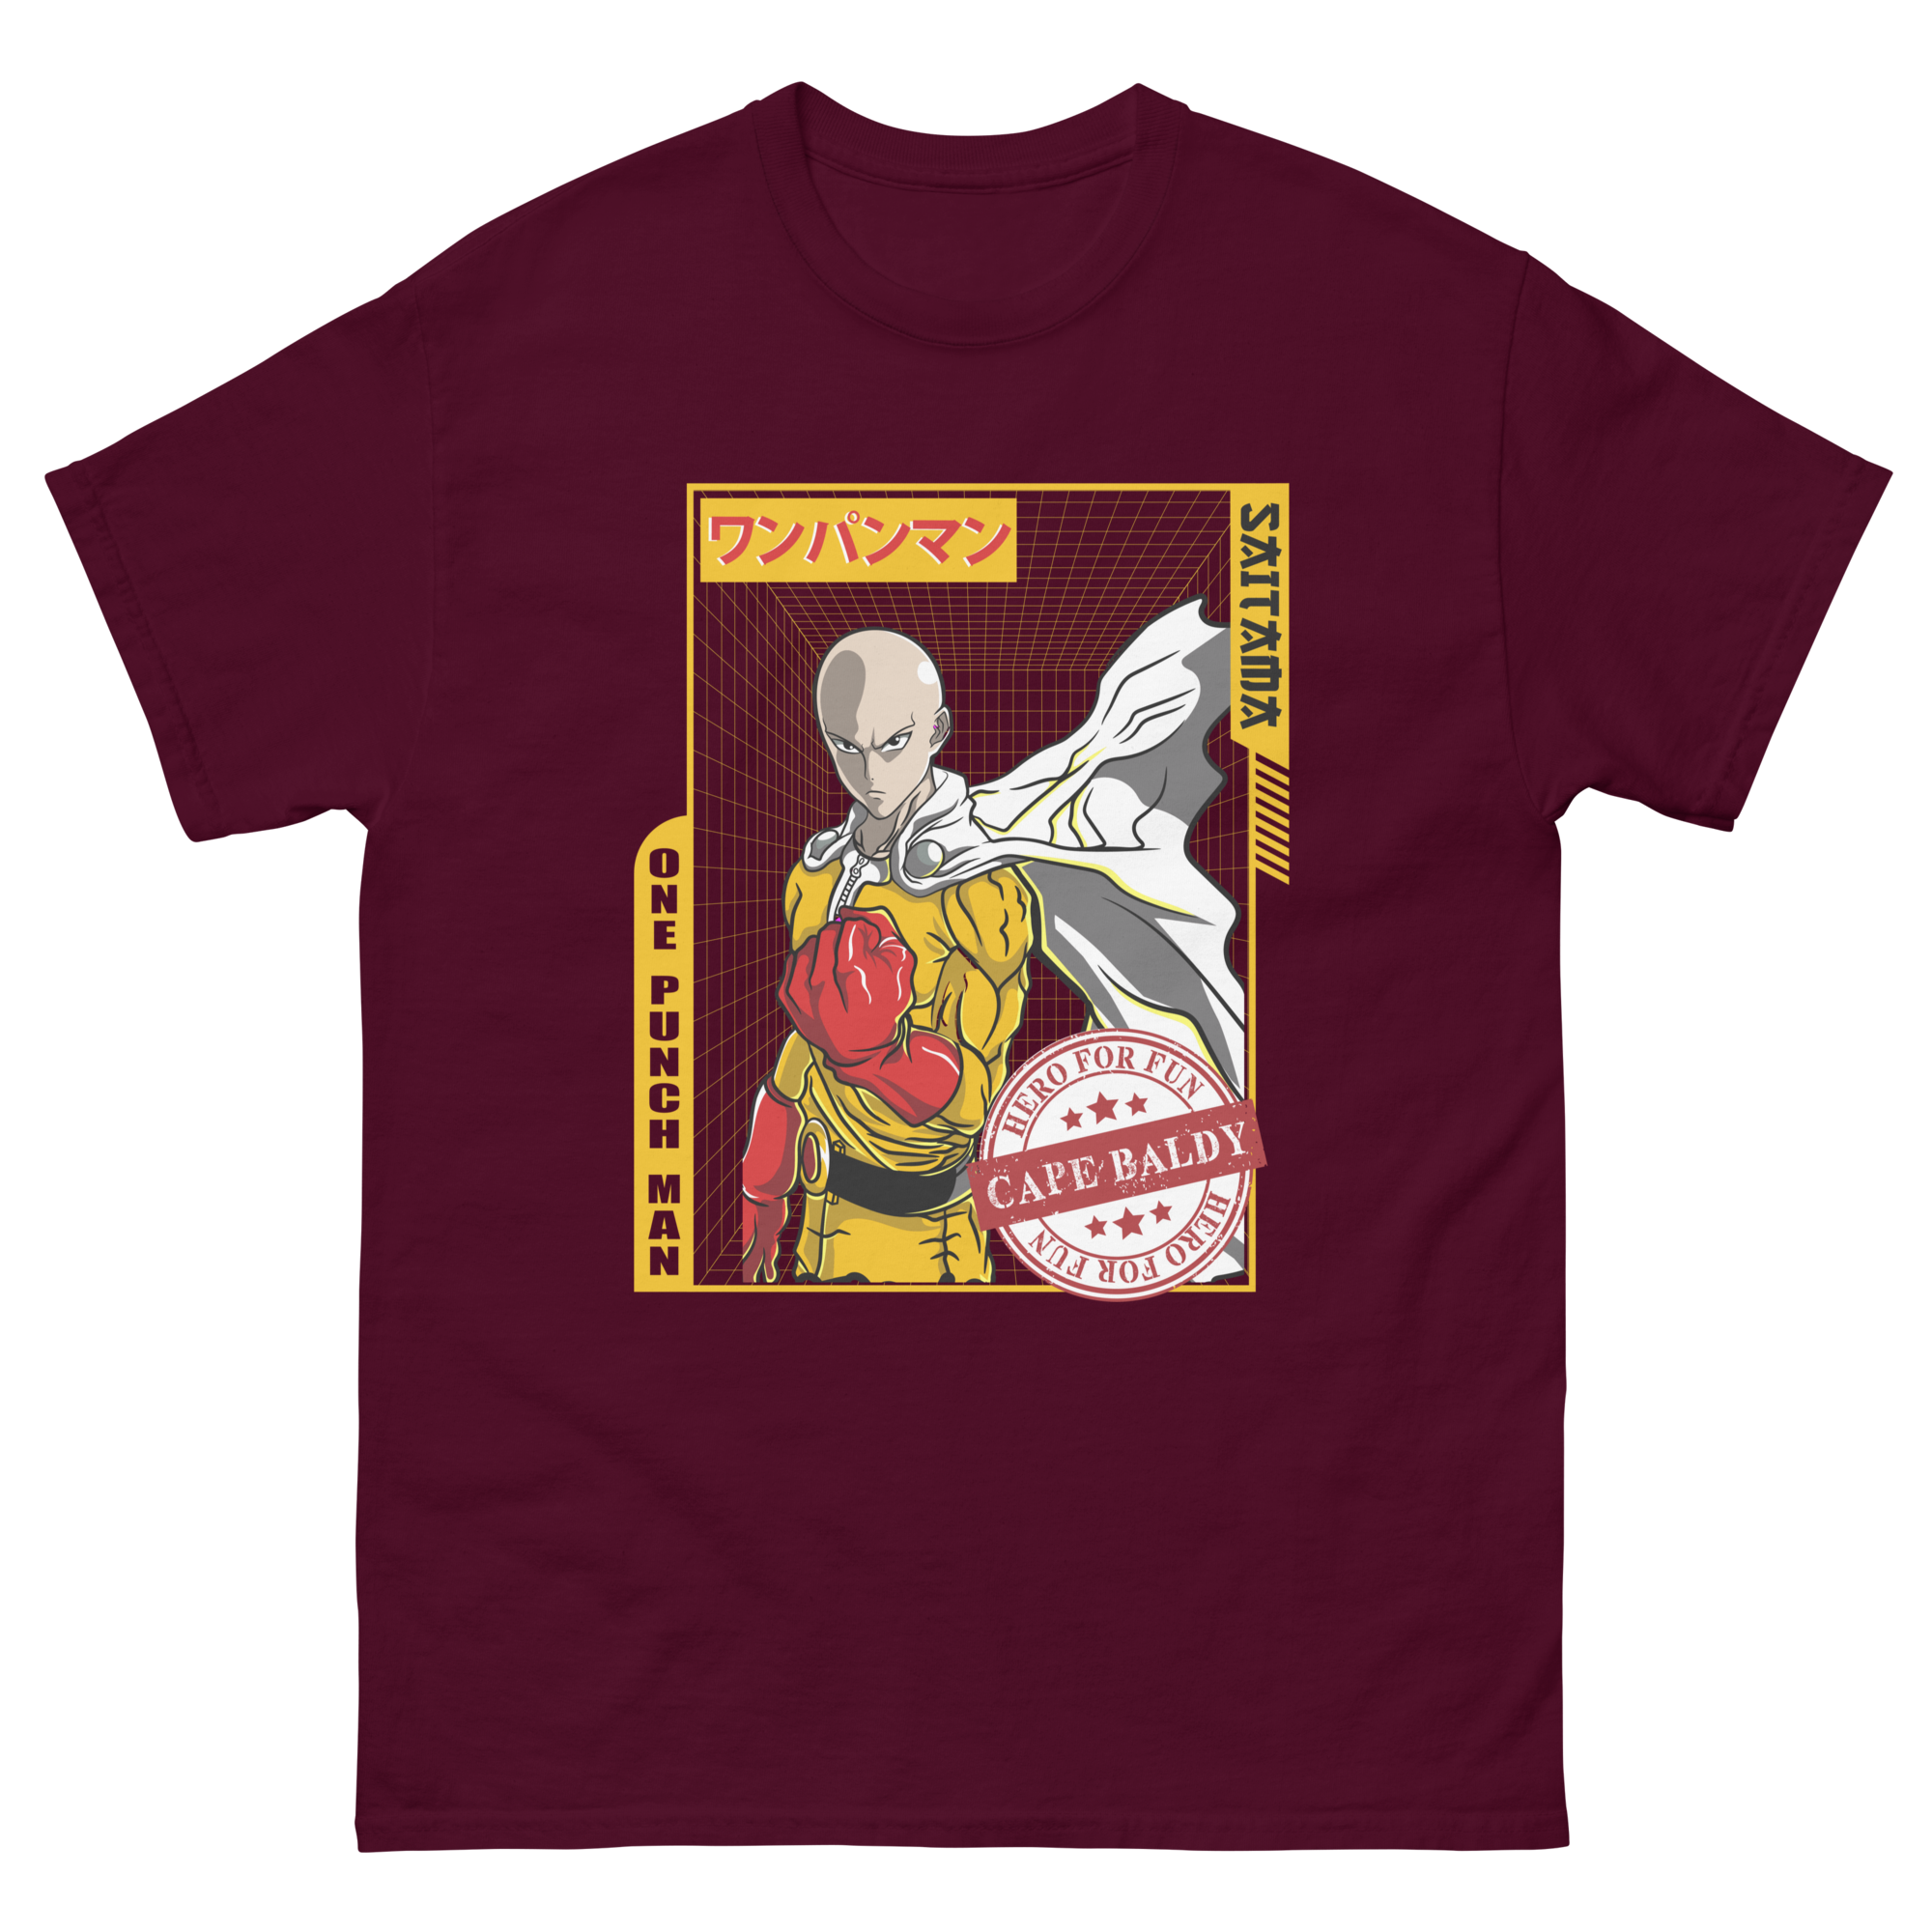 mens-classic-tee-maroon-front-65b3988b3a952.png